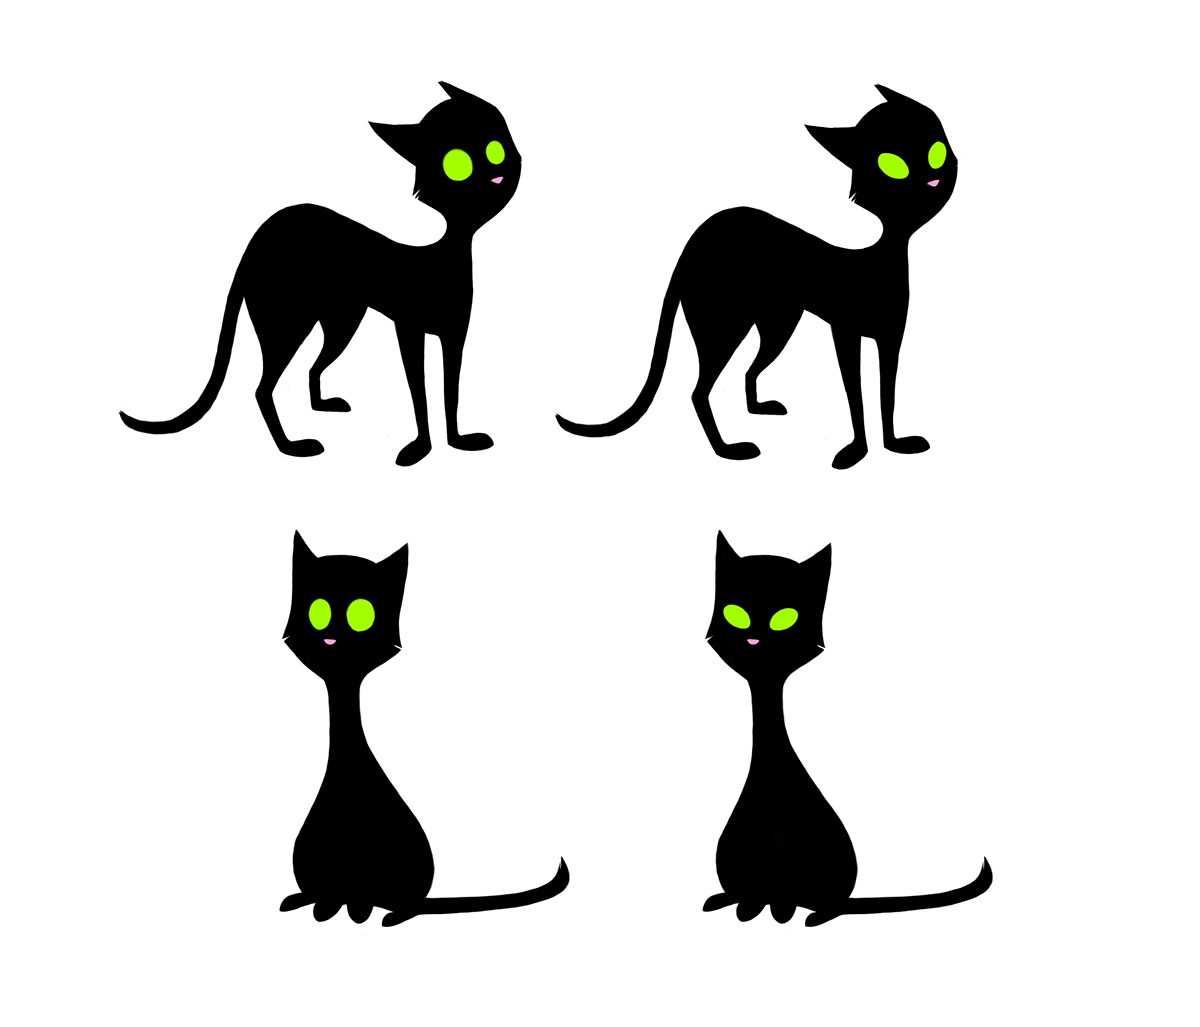 design Character characters Animated Short animated concept concept art cats simplistic